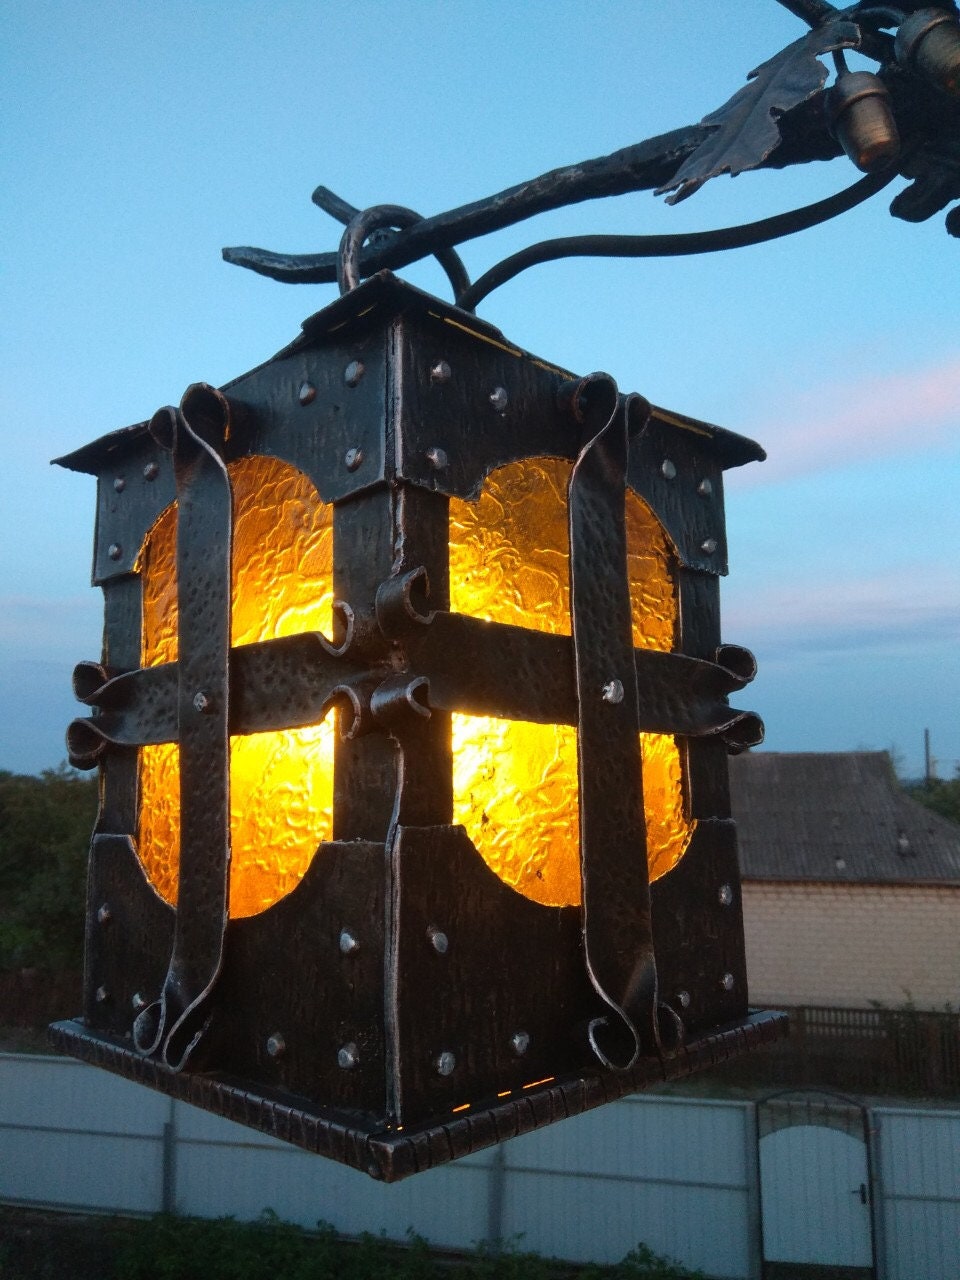 LED lamp, solar battery, wall sconce, outdoor sconce, outside sconce, owl, birthday, castle, medieval, cottage, midcentury, anniversary,bird